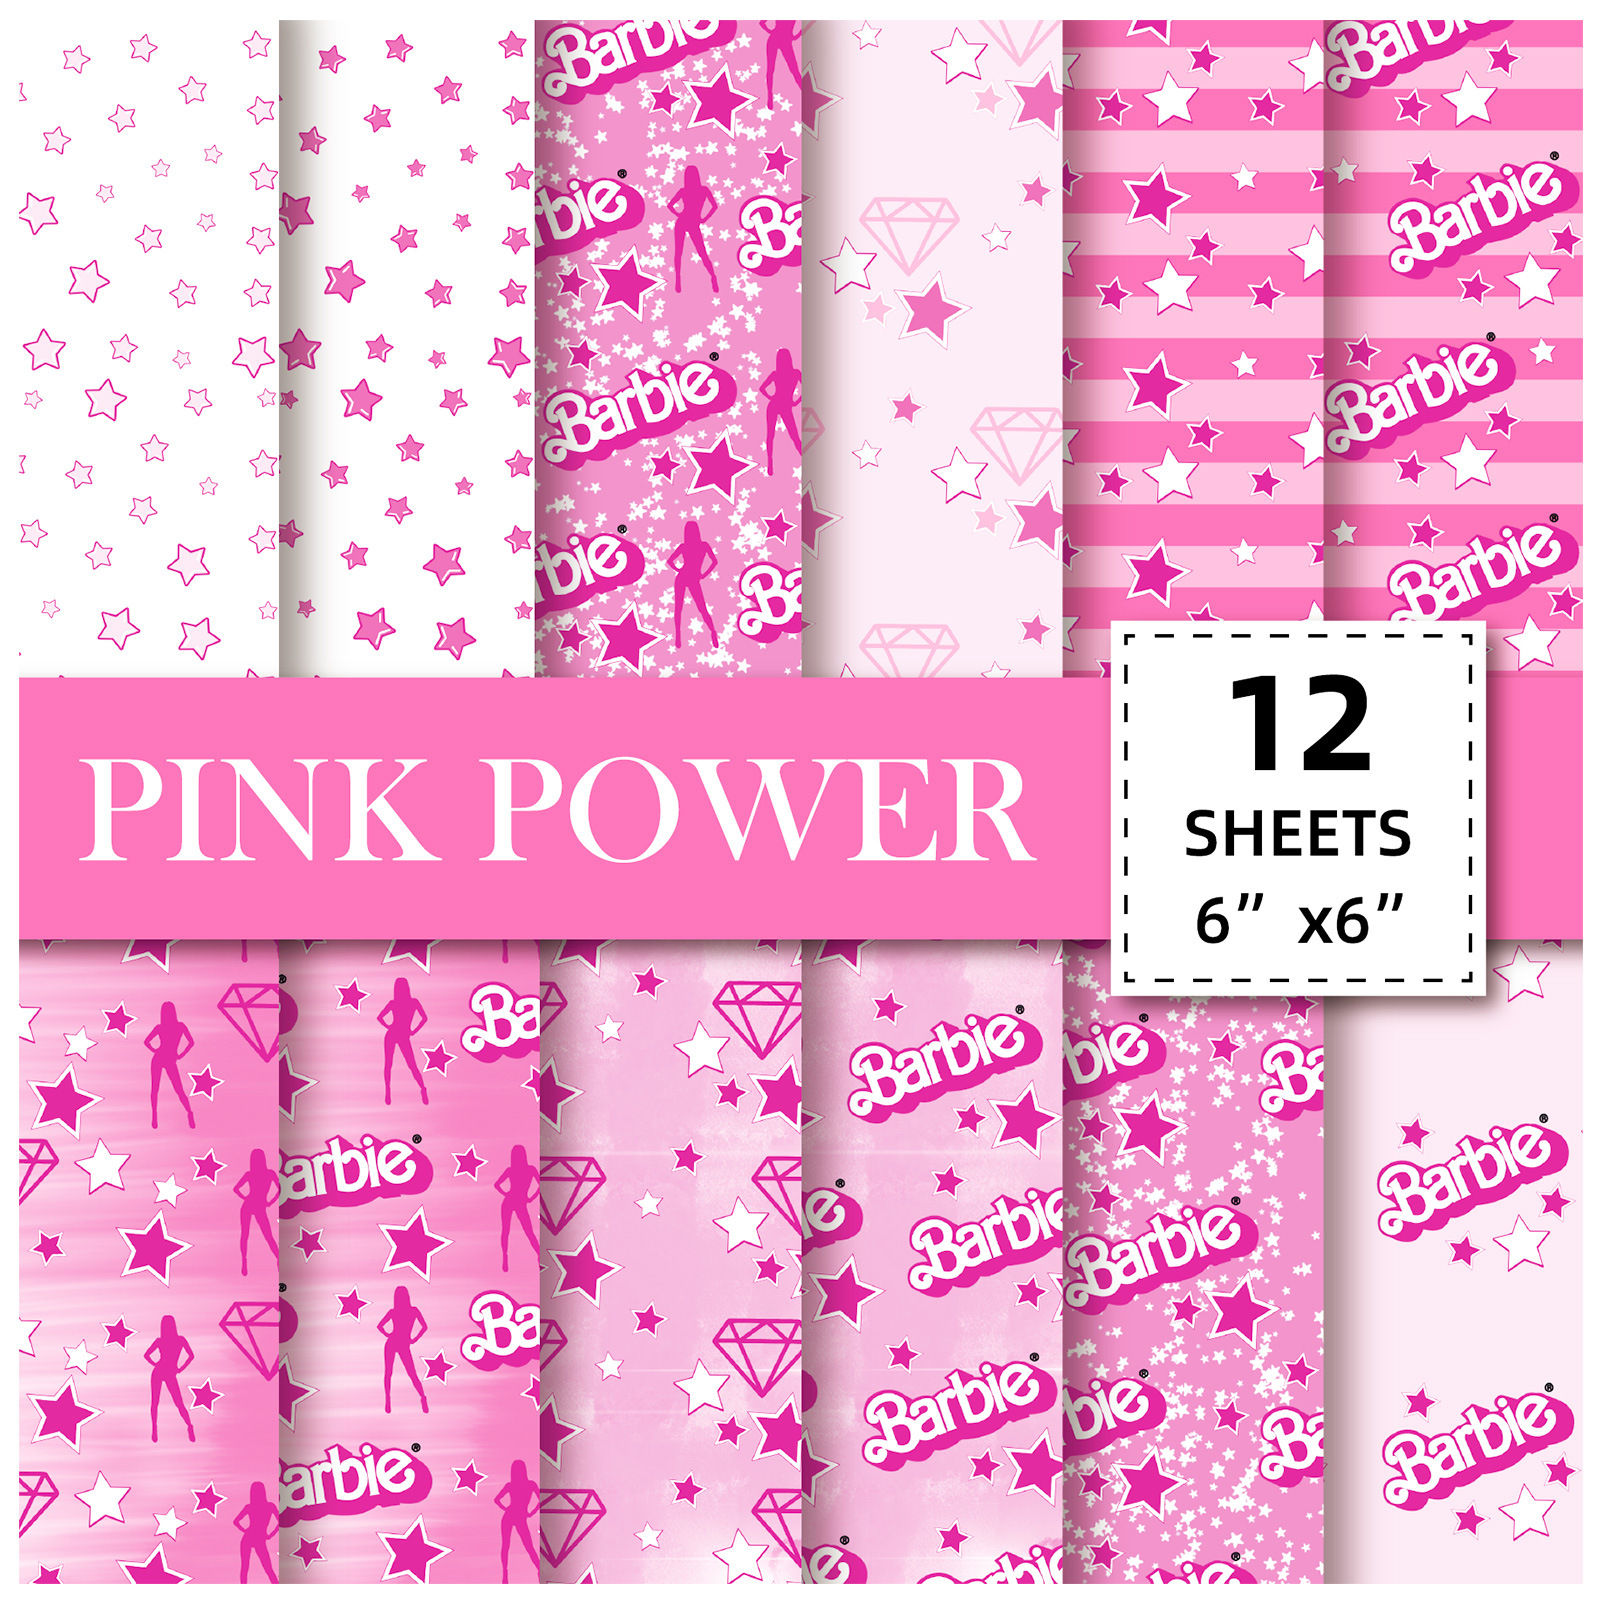 Dreamy Barbie Pink Origami Paper 12-Pack for DIY Cranes & Journals